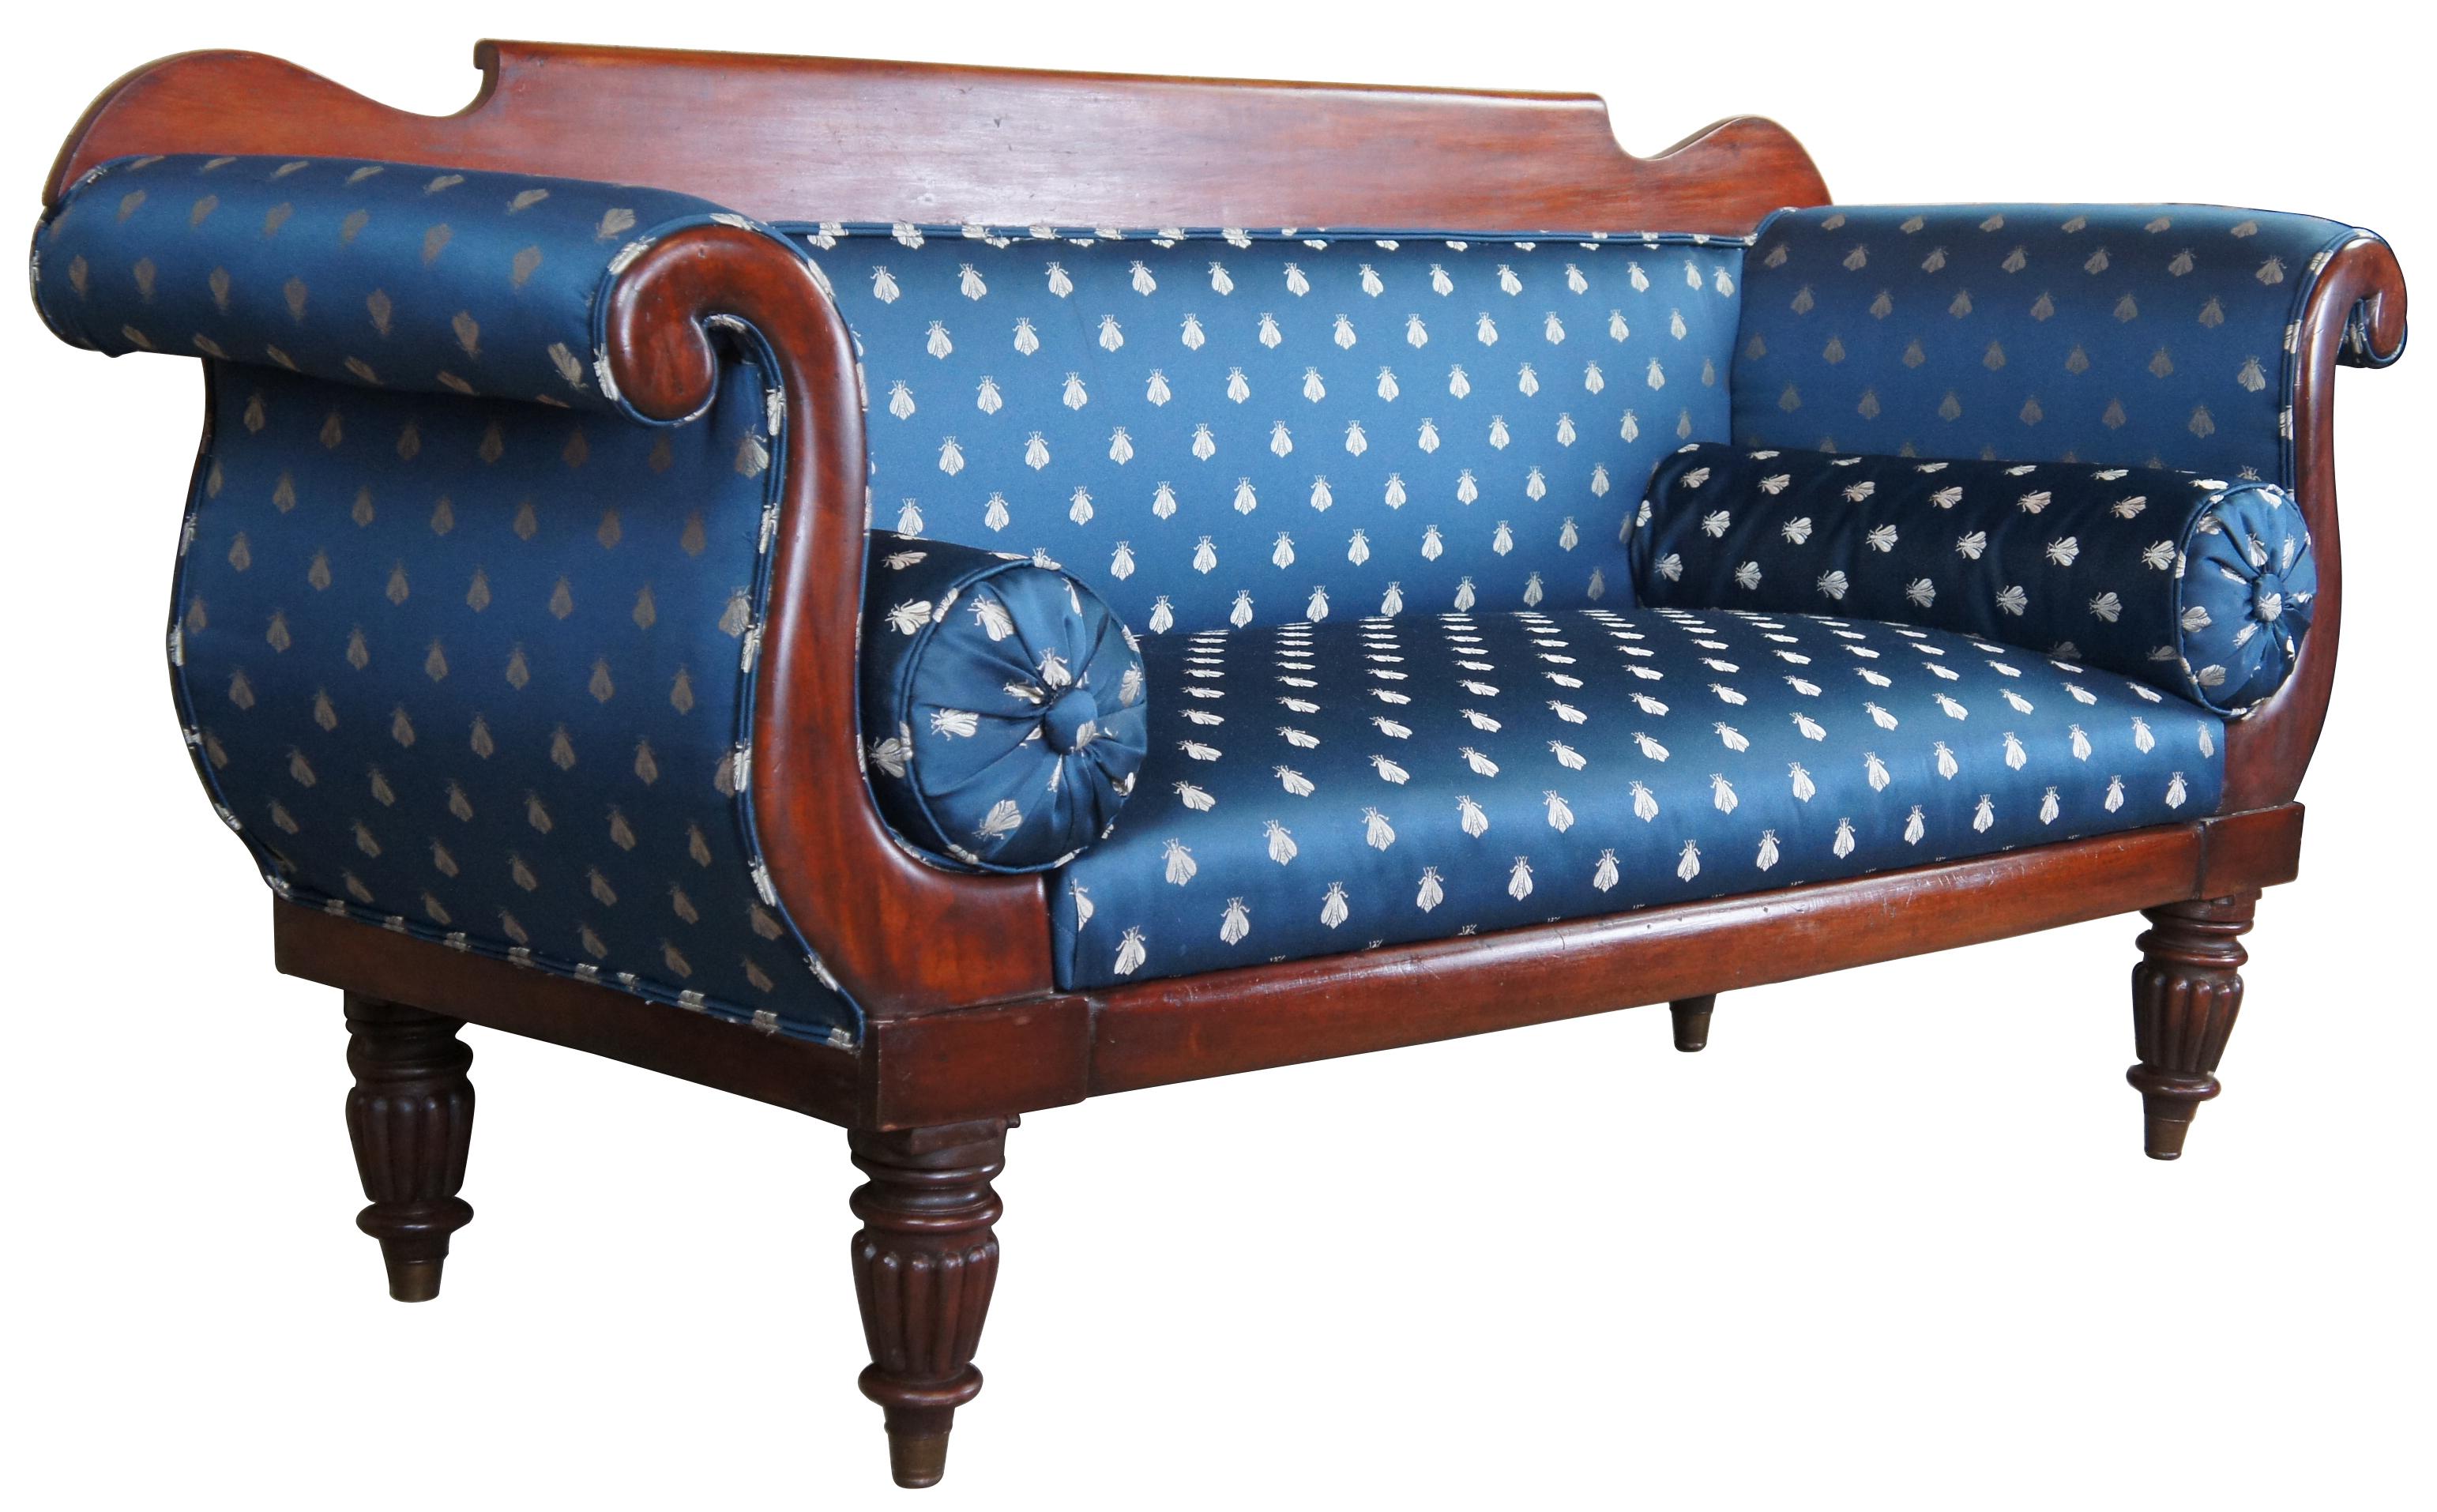 Antique Victorian parlor settee or sofa. Made of mahogany featuring rolled arms and blue silk scalamandre upholstery with insects and bolster pillows. The sofa is supported by turned reeded legs with brass caps.
    